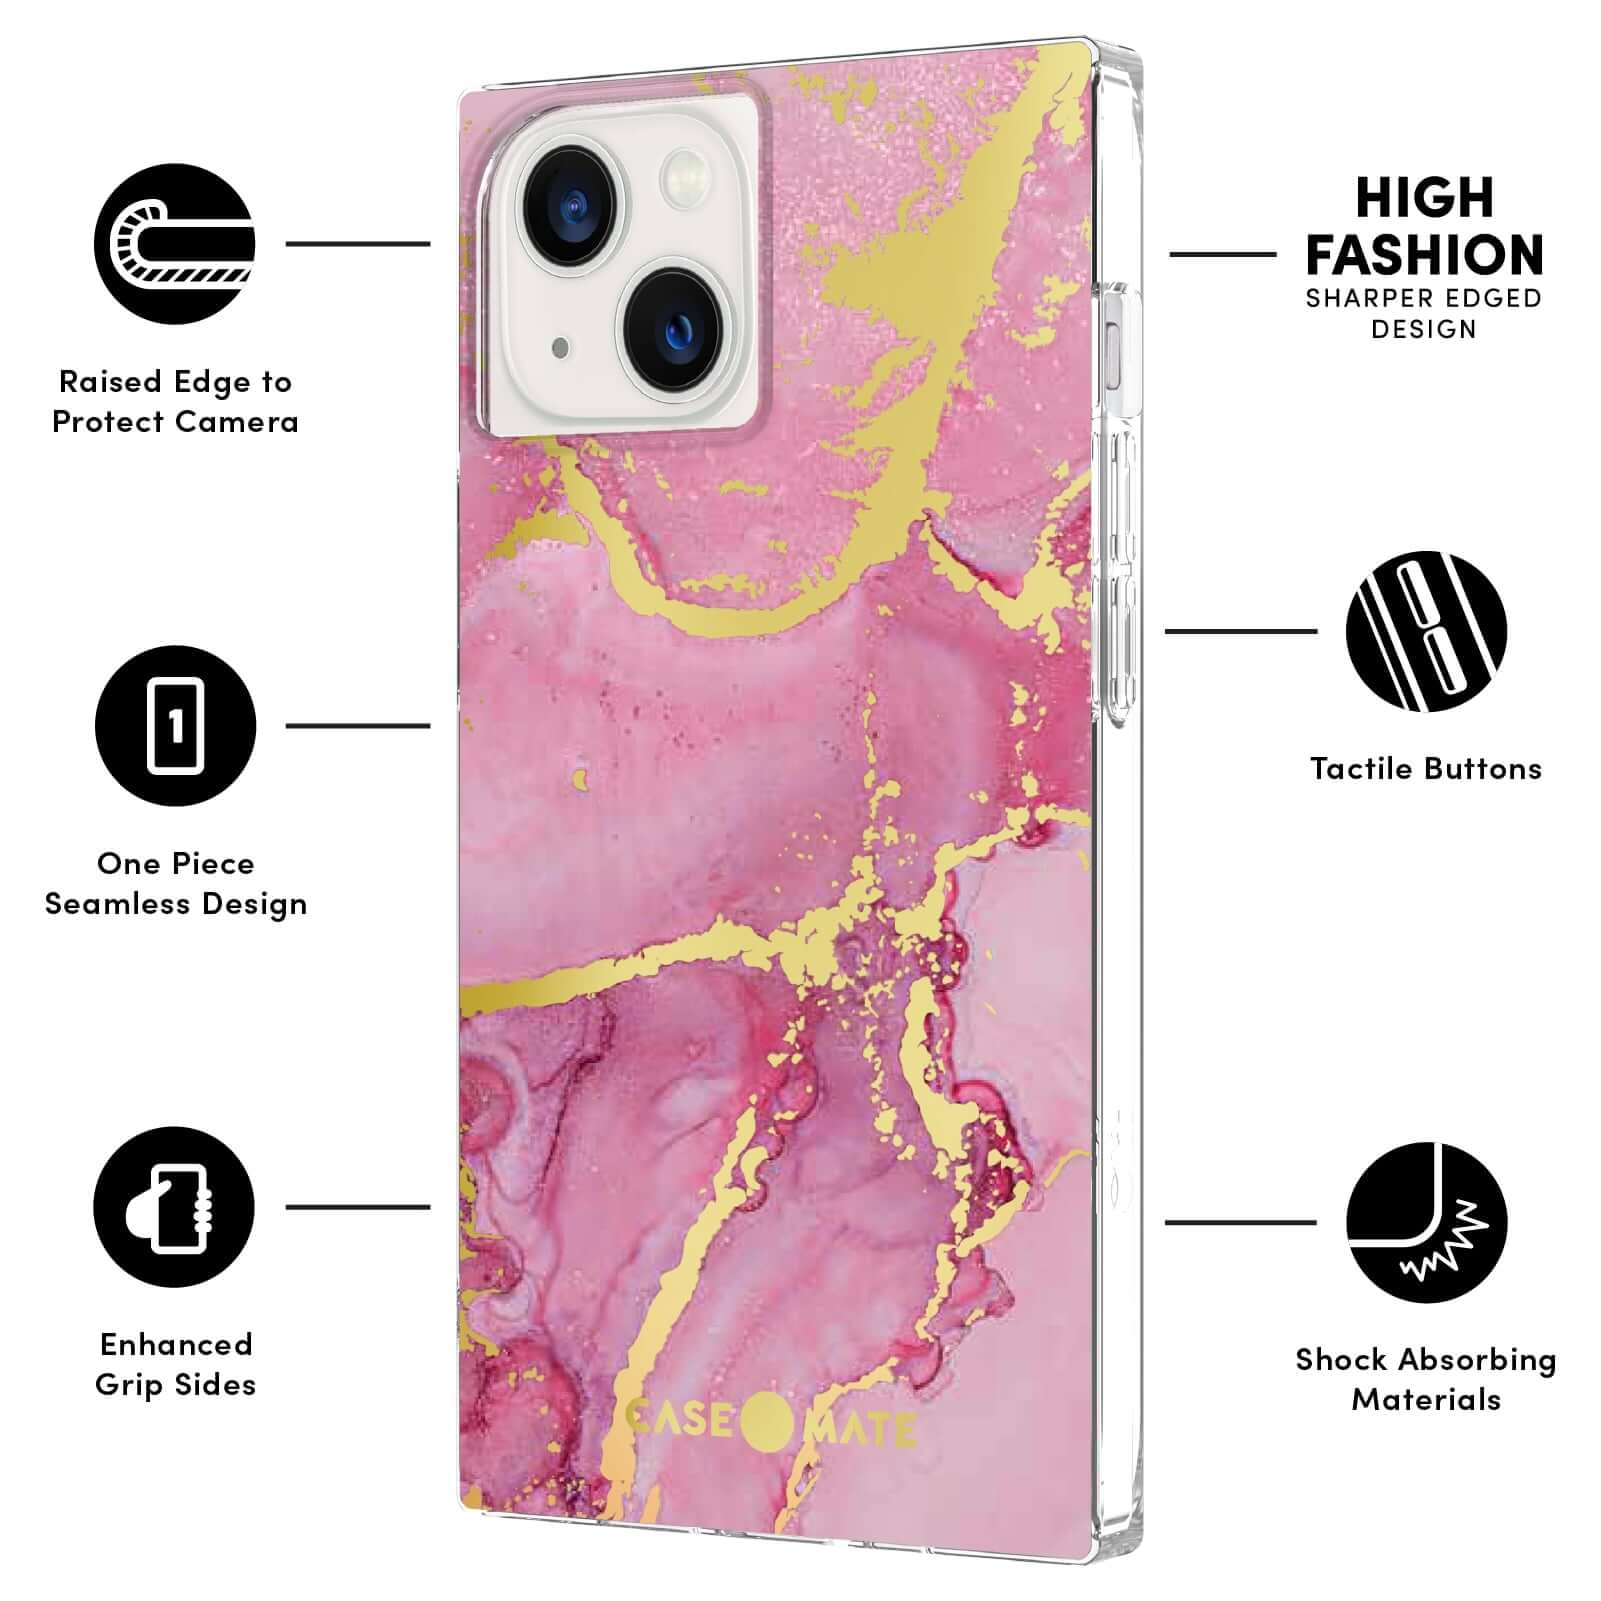 FEATURES: RAISED EDGE TO PROTECT CAMERA, ONE PIECE SEAMLESS DSIGN, ENHANCED GRIP SIDES, HIGH FASHION SHARPER EDGED DESIGN, TACTILE BUTTONS, SHOCK ABSORBING MATERIALS. COLOR::MAGENTA MARBLE